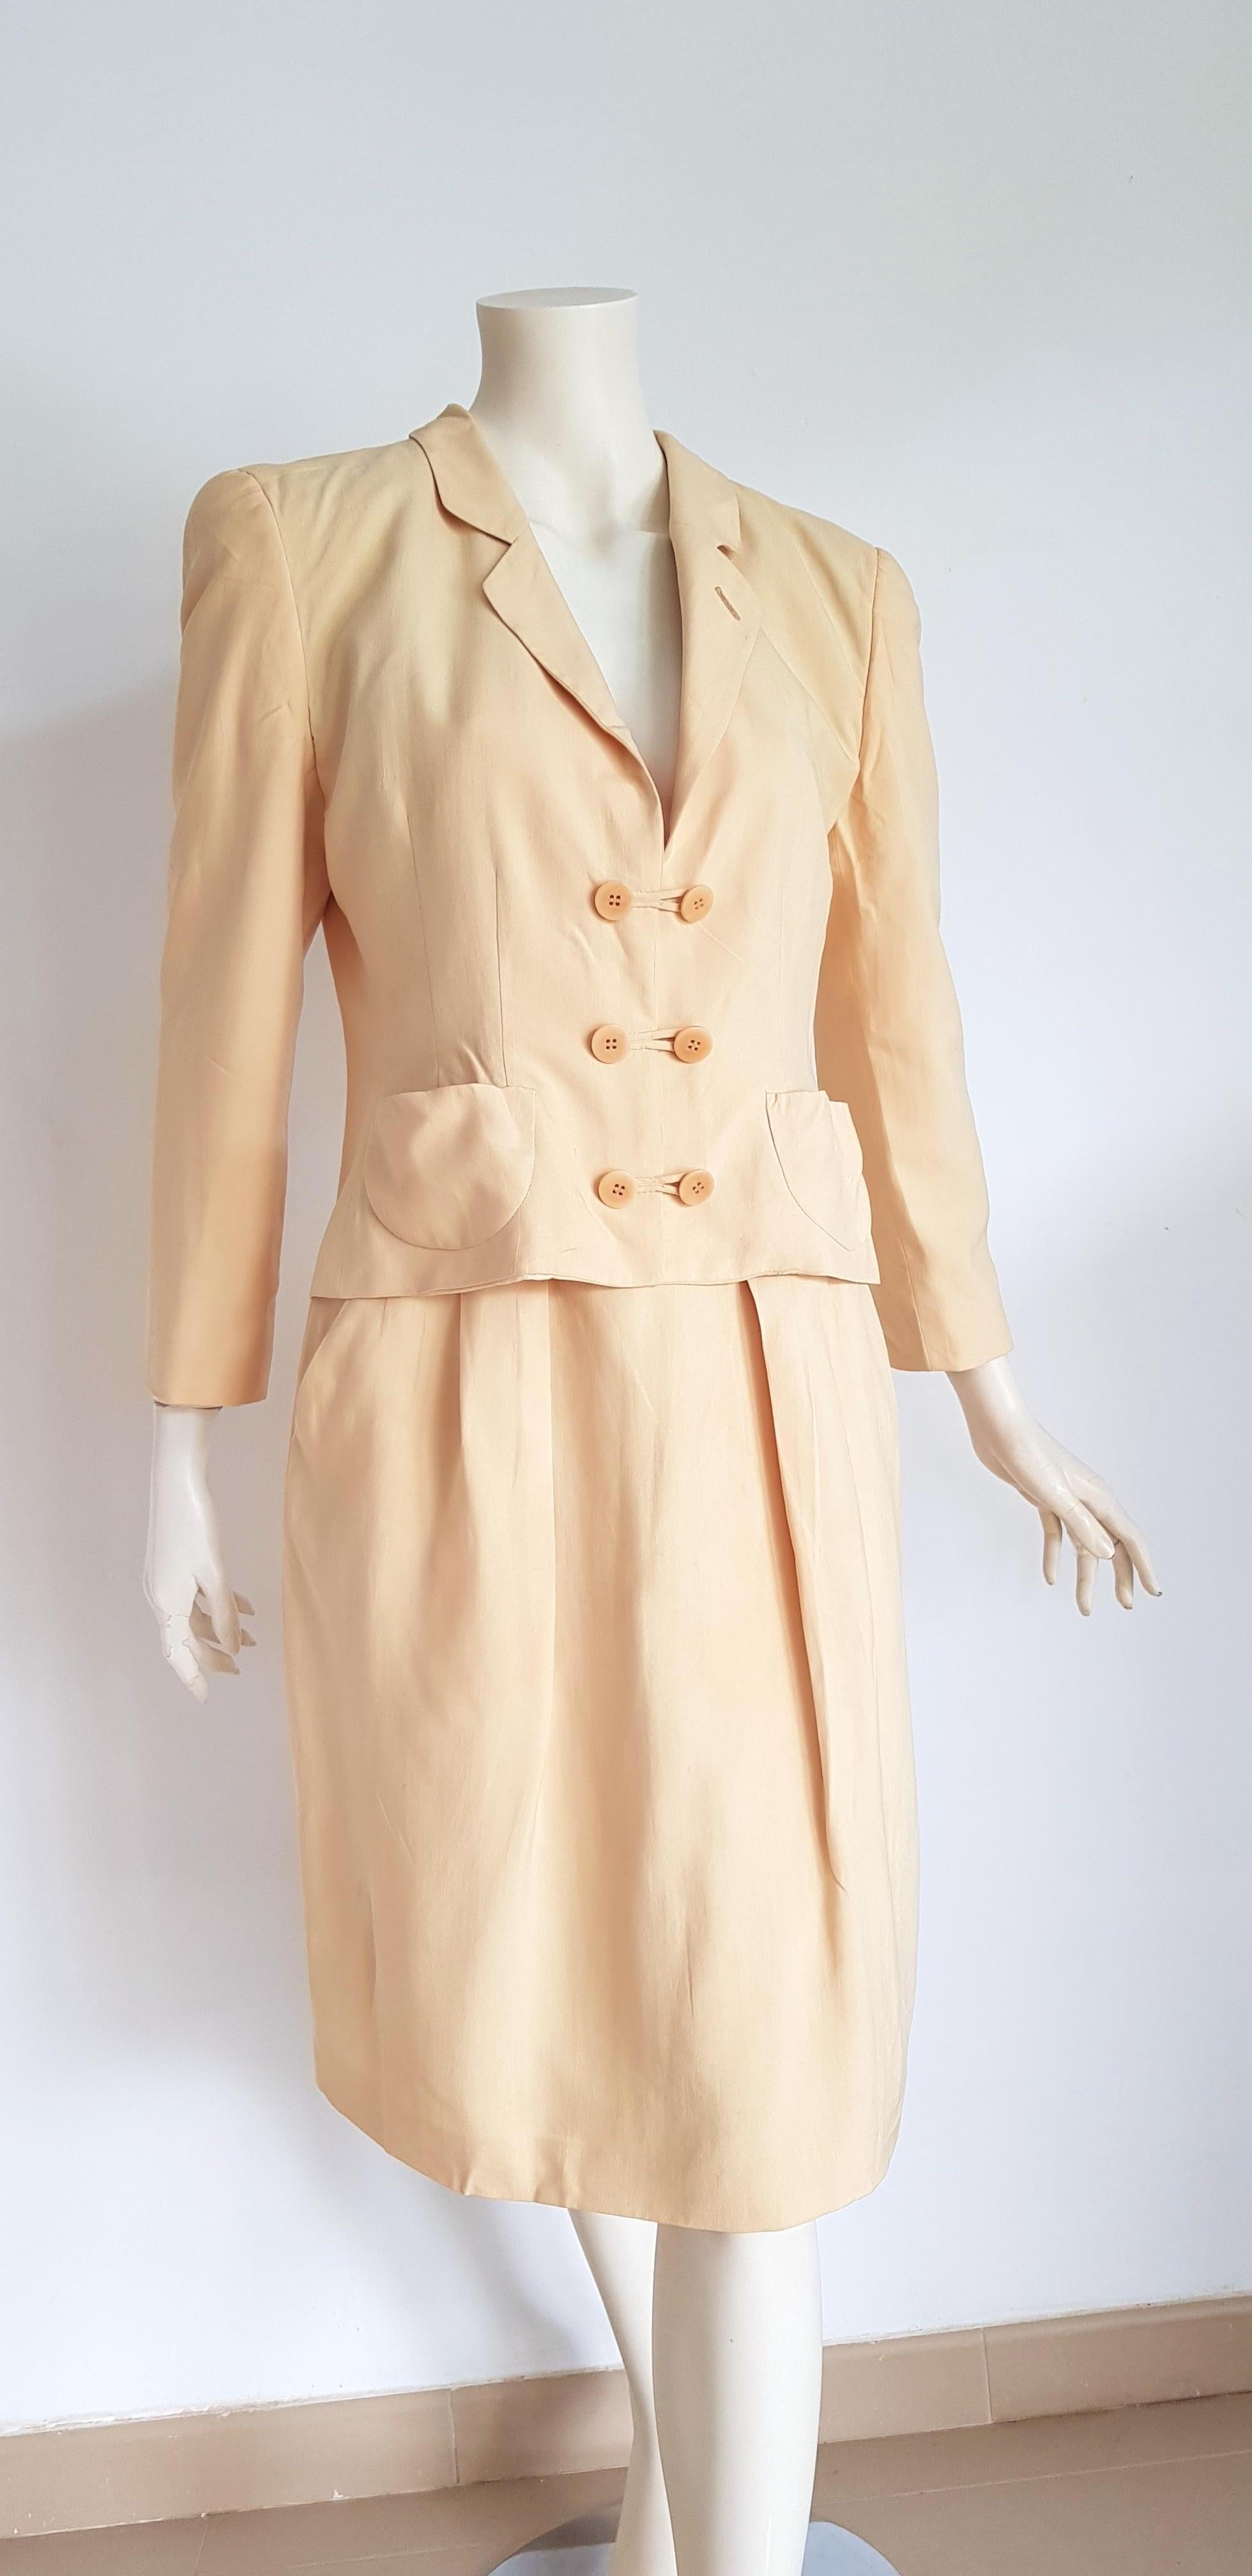 Giorgio ARMANI beige yellow tone jacket and skirt, silk, suit - Unworn, New

SIZE: equivalent to about Small / Medium, please review approx measurements as follows in cm. 
JACKET: lenght 56, chest underarm to underarm 52, bust circumference 94,